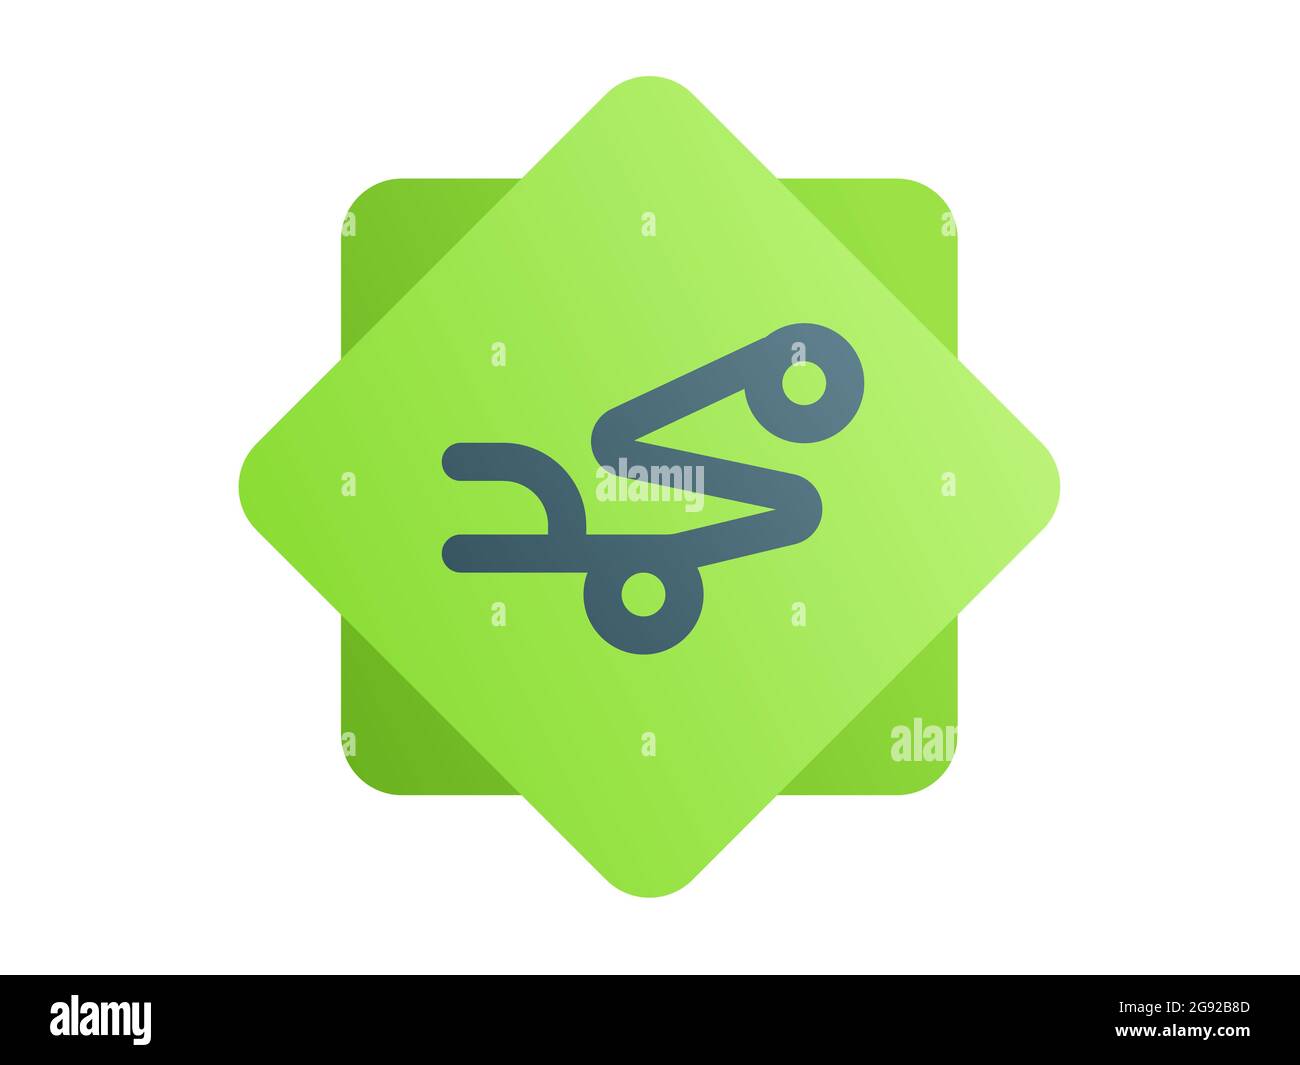 muhammad prophet islam word single isolated icon with smooth style vector illustration Stock Photo